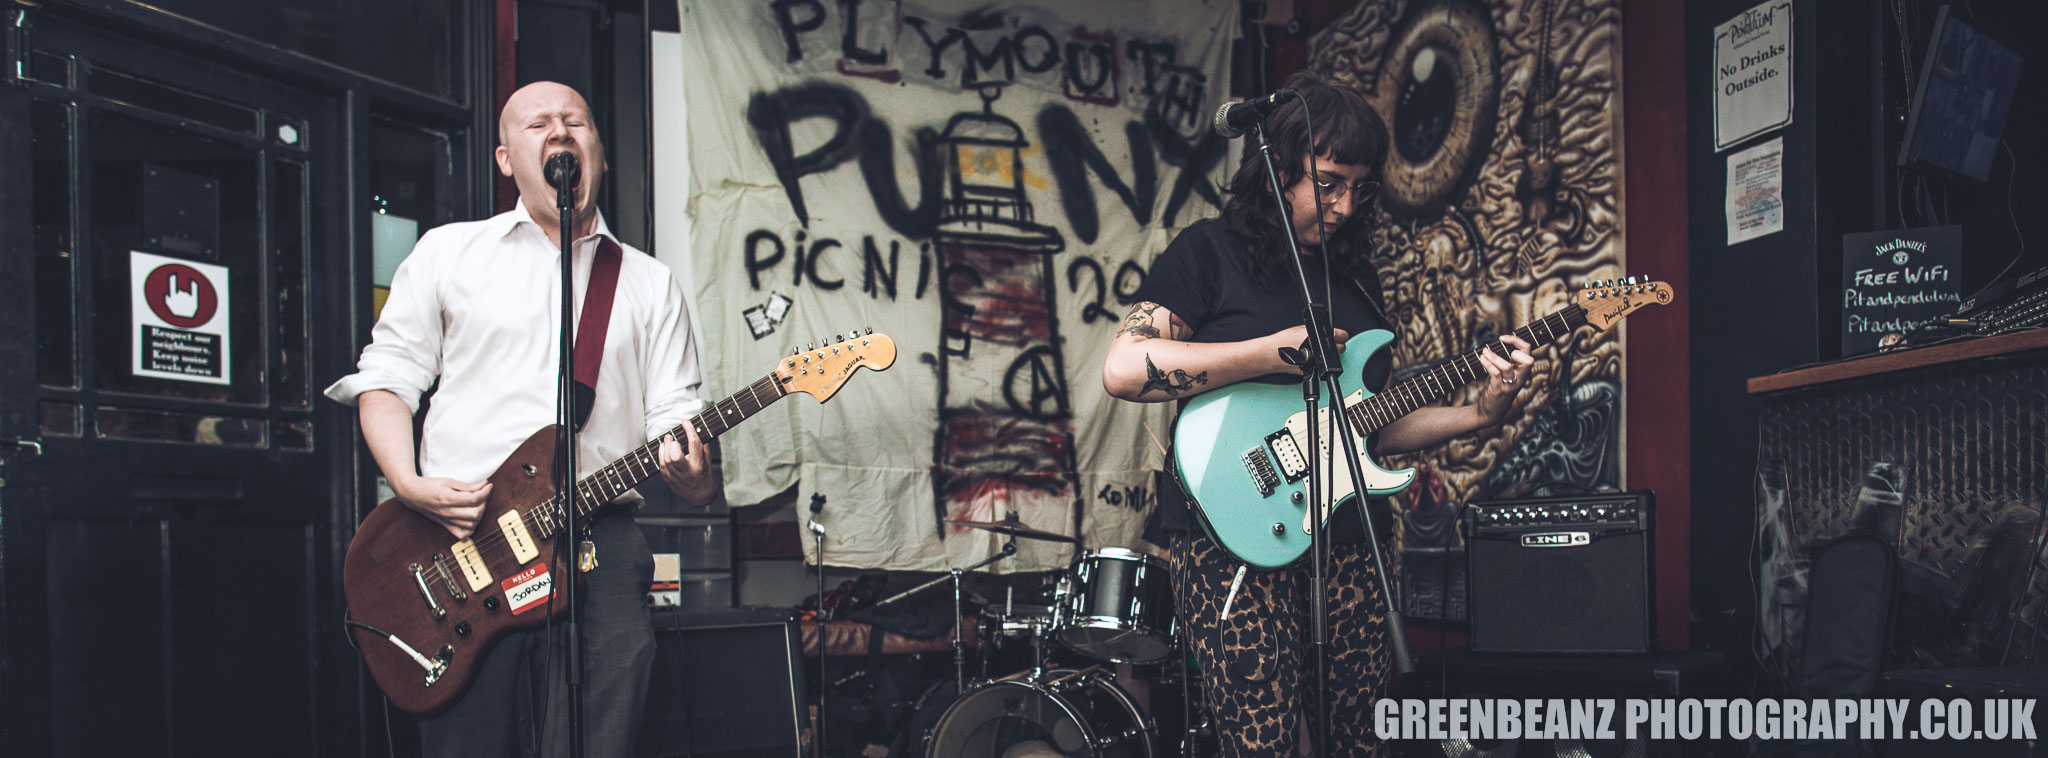 The Discount Lindas at Plymouth's Punx Picnic 2019